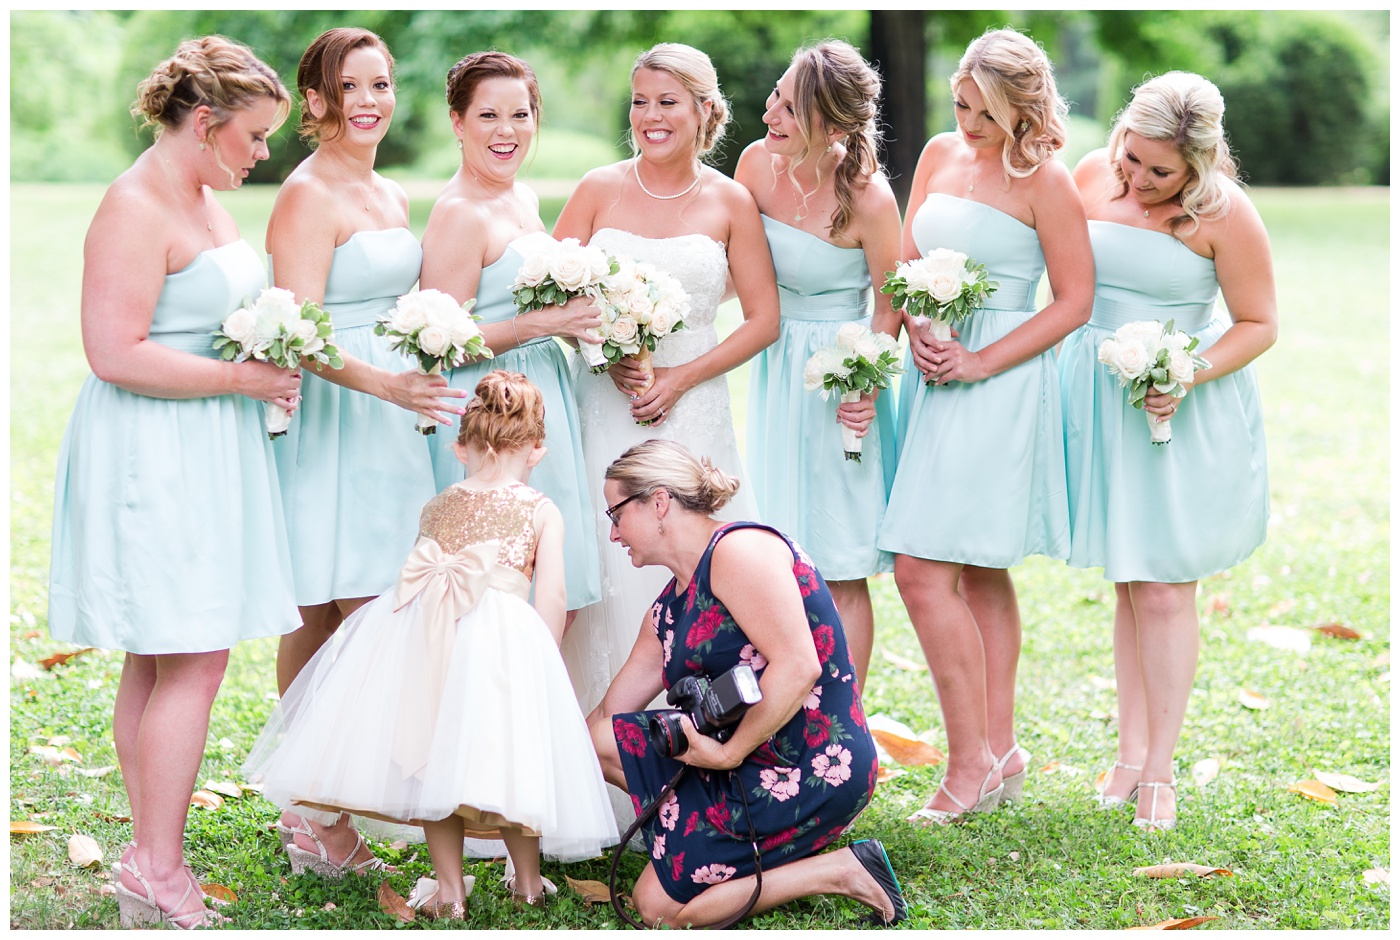 Leigh Skaggs Photography | Behind the Scenes